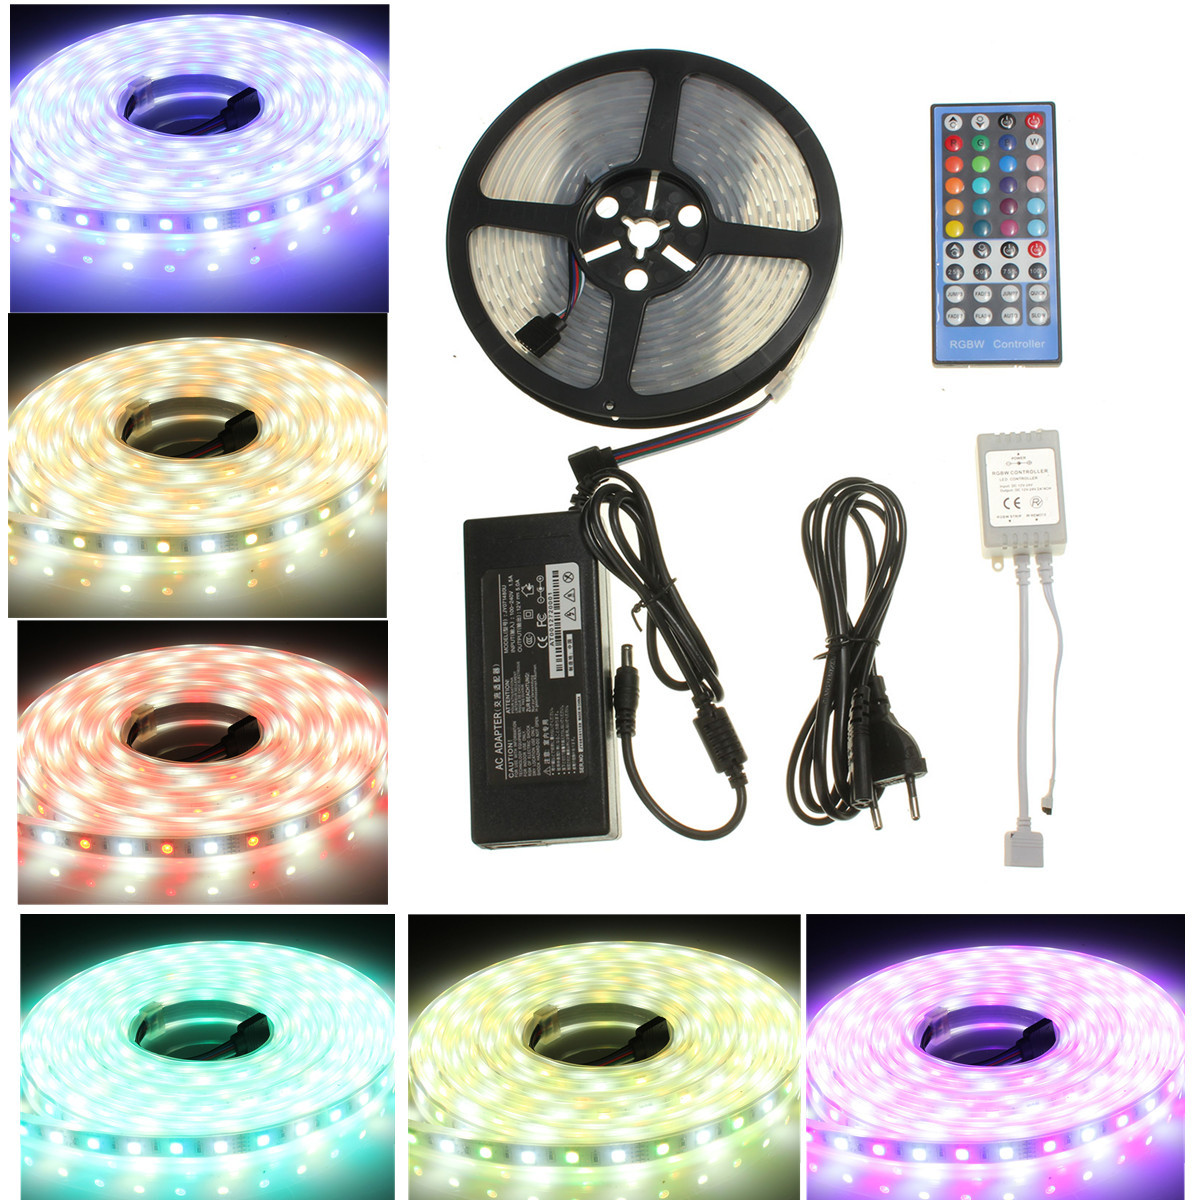 

SOLMORE 5M 60W 5A 5050 300LEDs RGBW Waterproof Strip Light with 40 Keys Remote Control DC12V